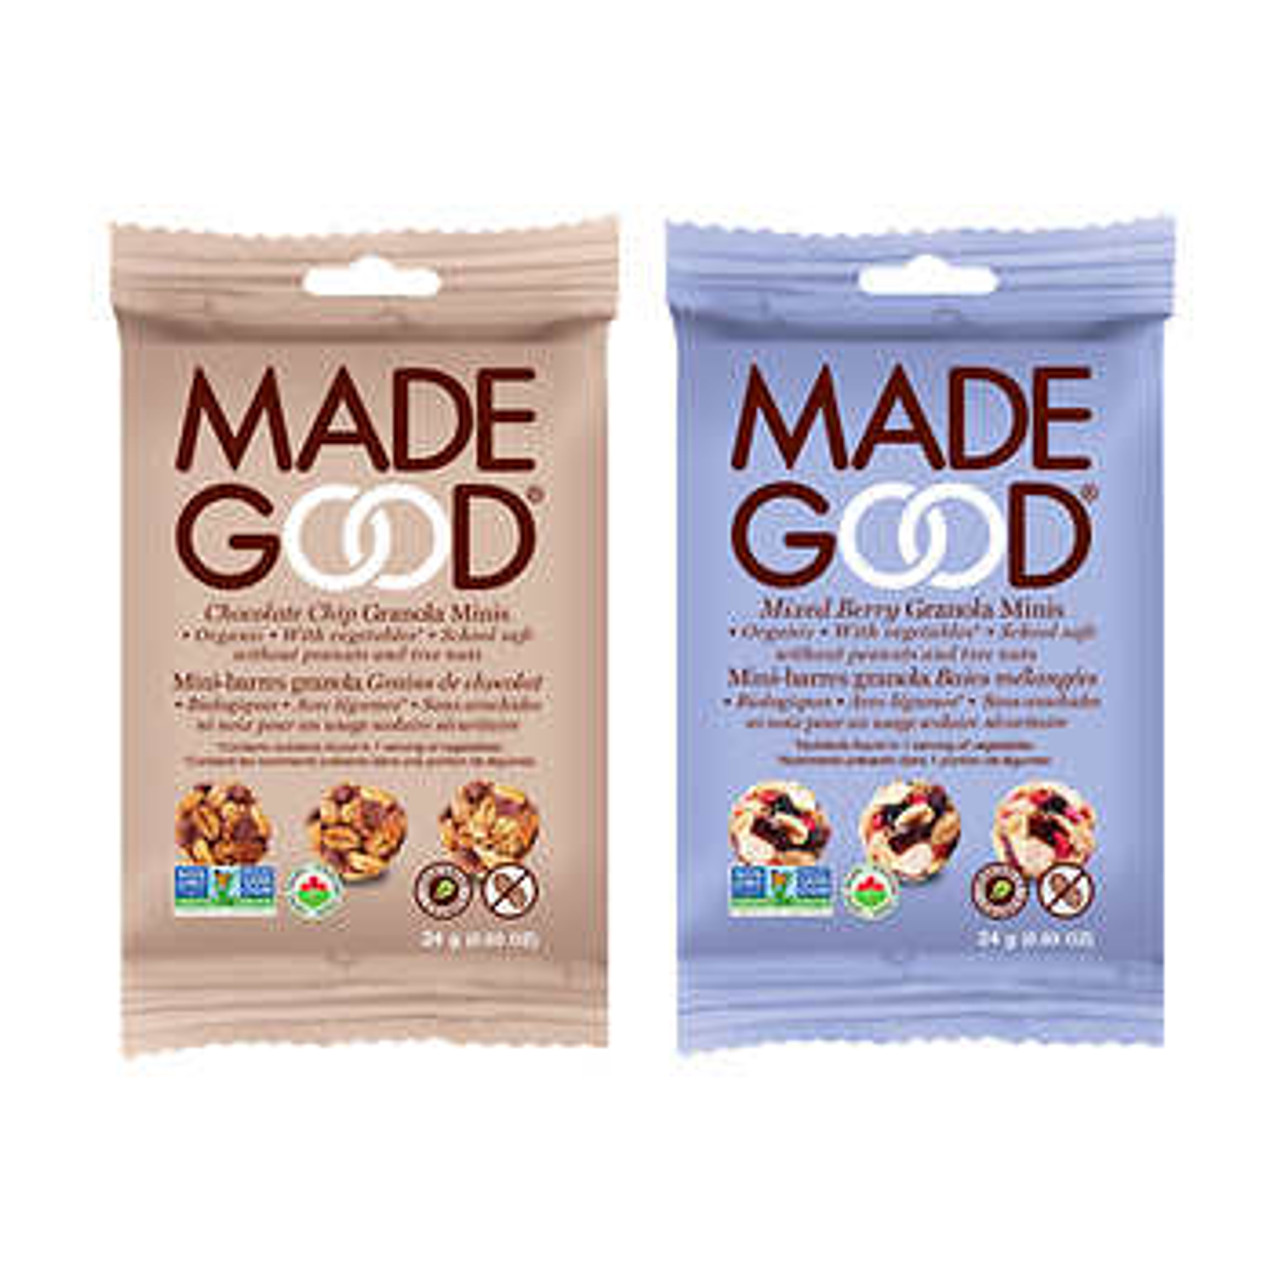 MadeGood Granola Minis - 20 Packs, 24g Each - Wholesome Snacking Delight- Chicken Pieces